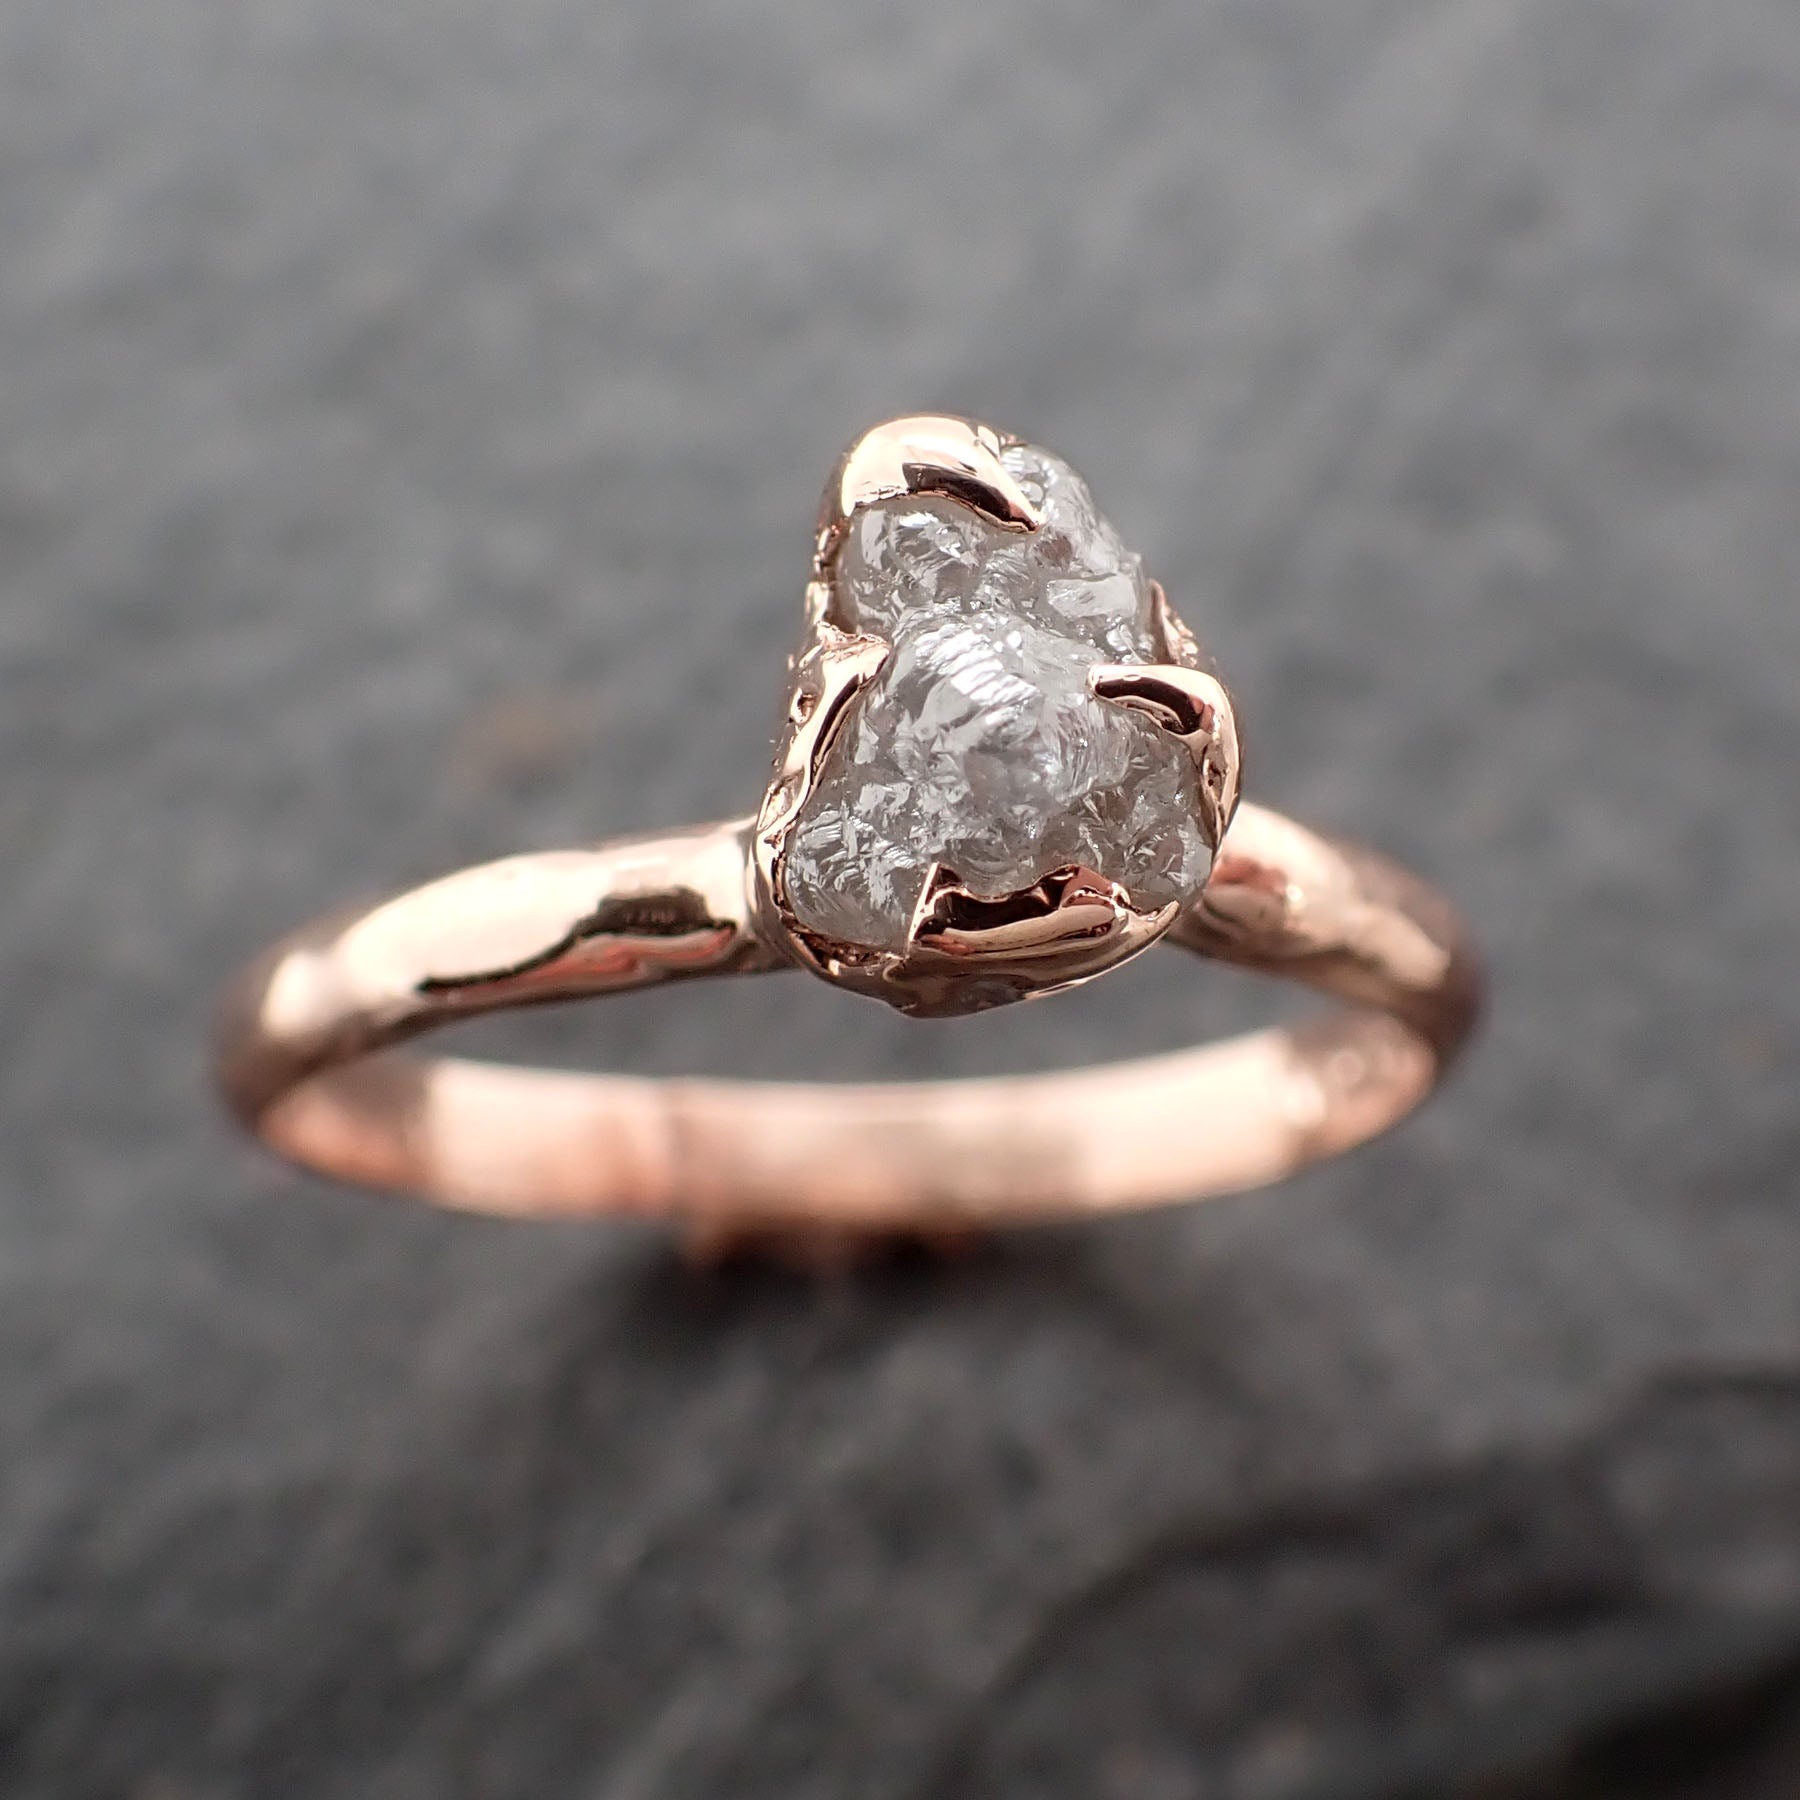 raw diamond solitaire engagement ring rough uncut rose gold conflict free diamond wedding promise 2451 Alternative Engagement